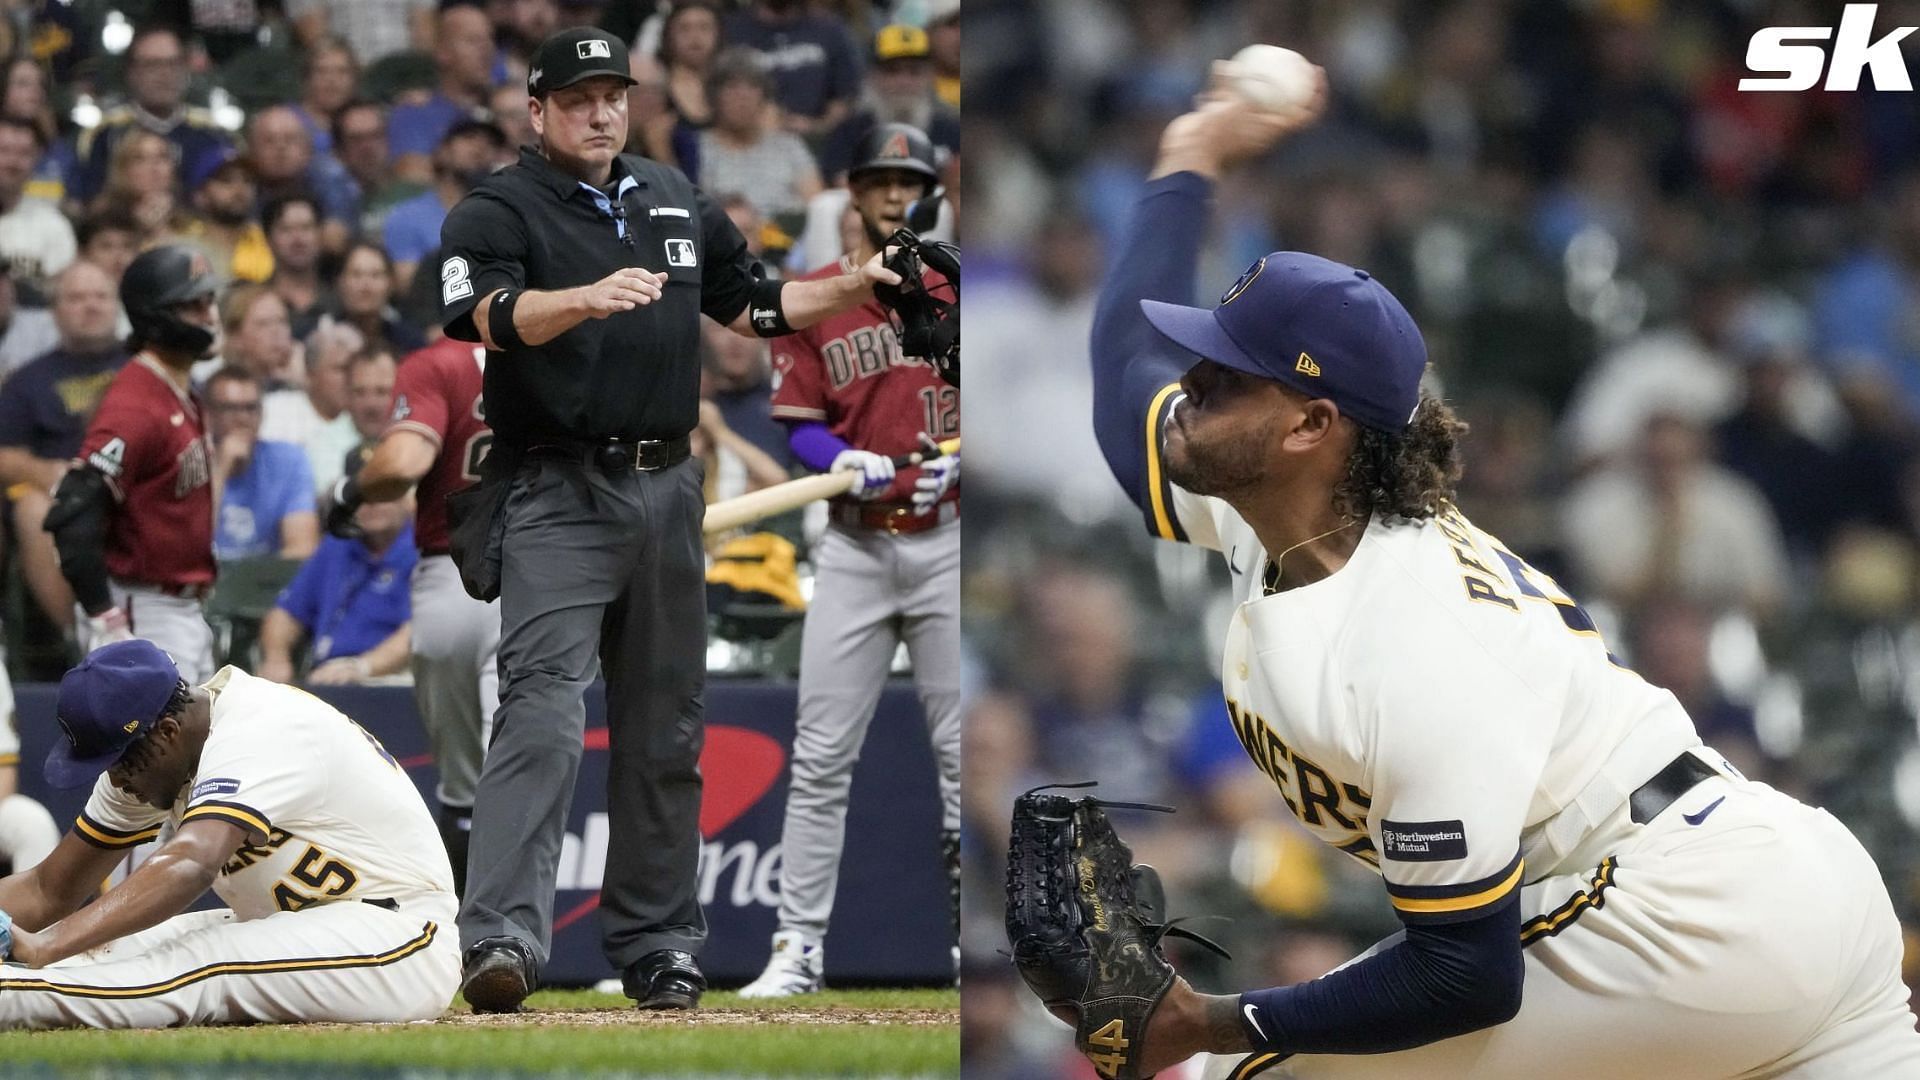 Craig Counsell laments offensive shortcomings as Brewers crash out of playoffs - &quot;We didn